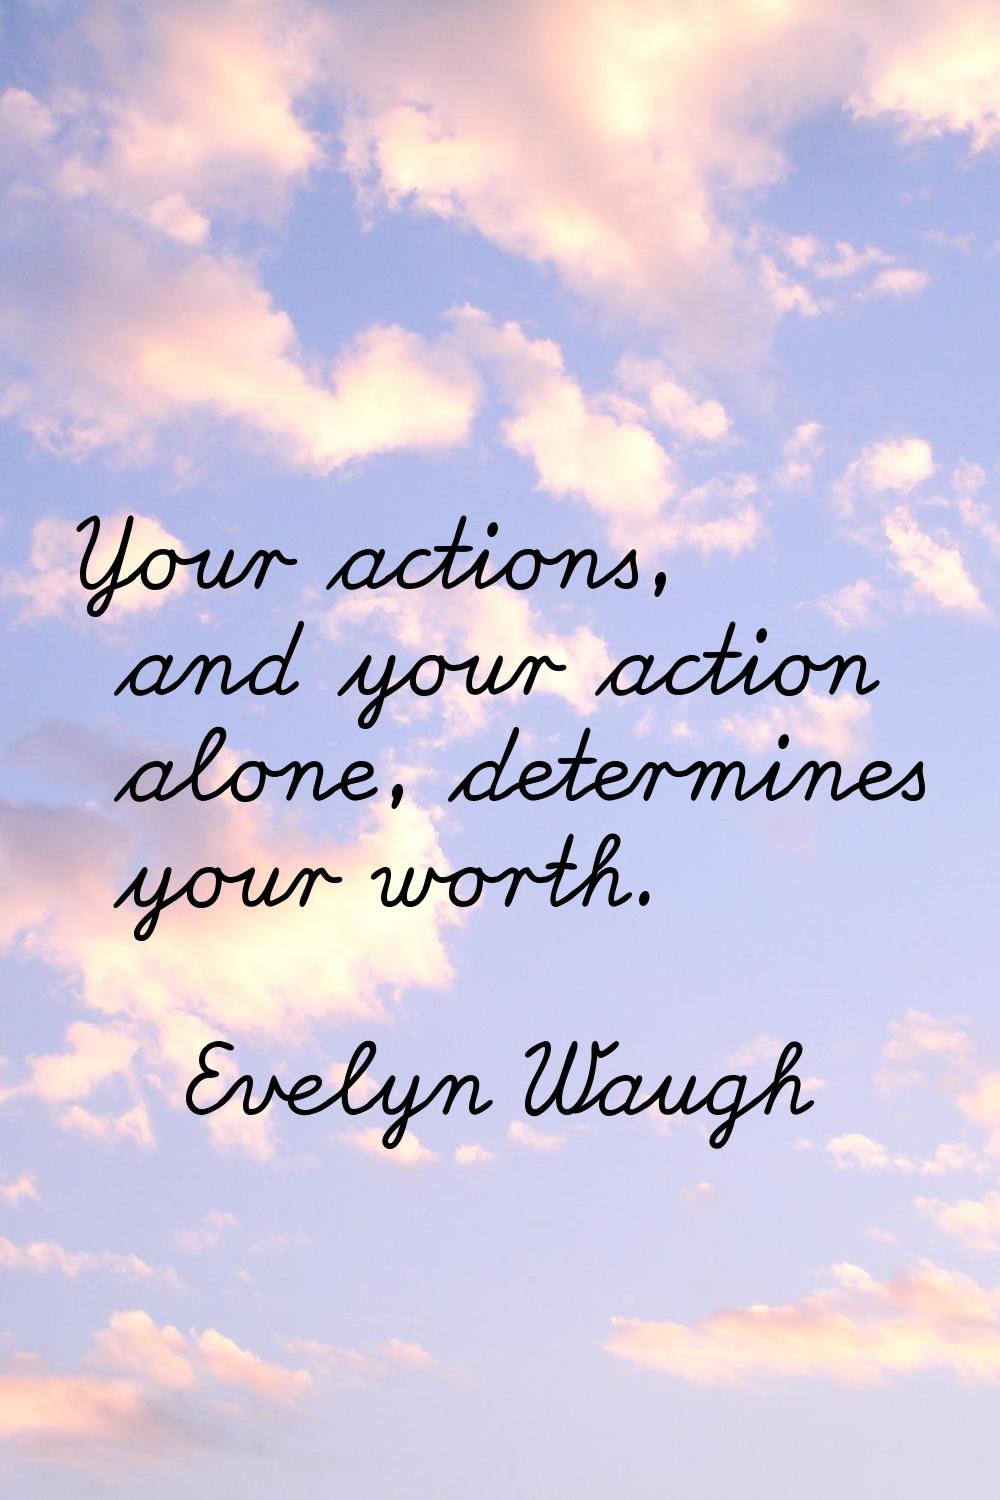 Your actions, and your action alone, determines your worth.